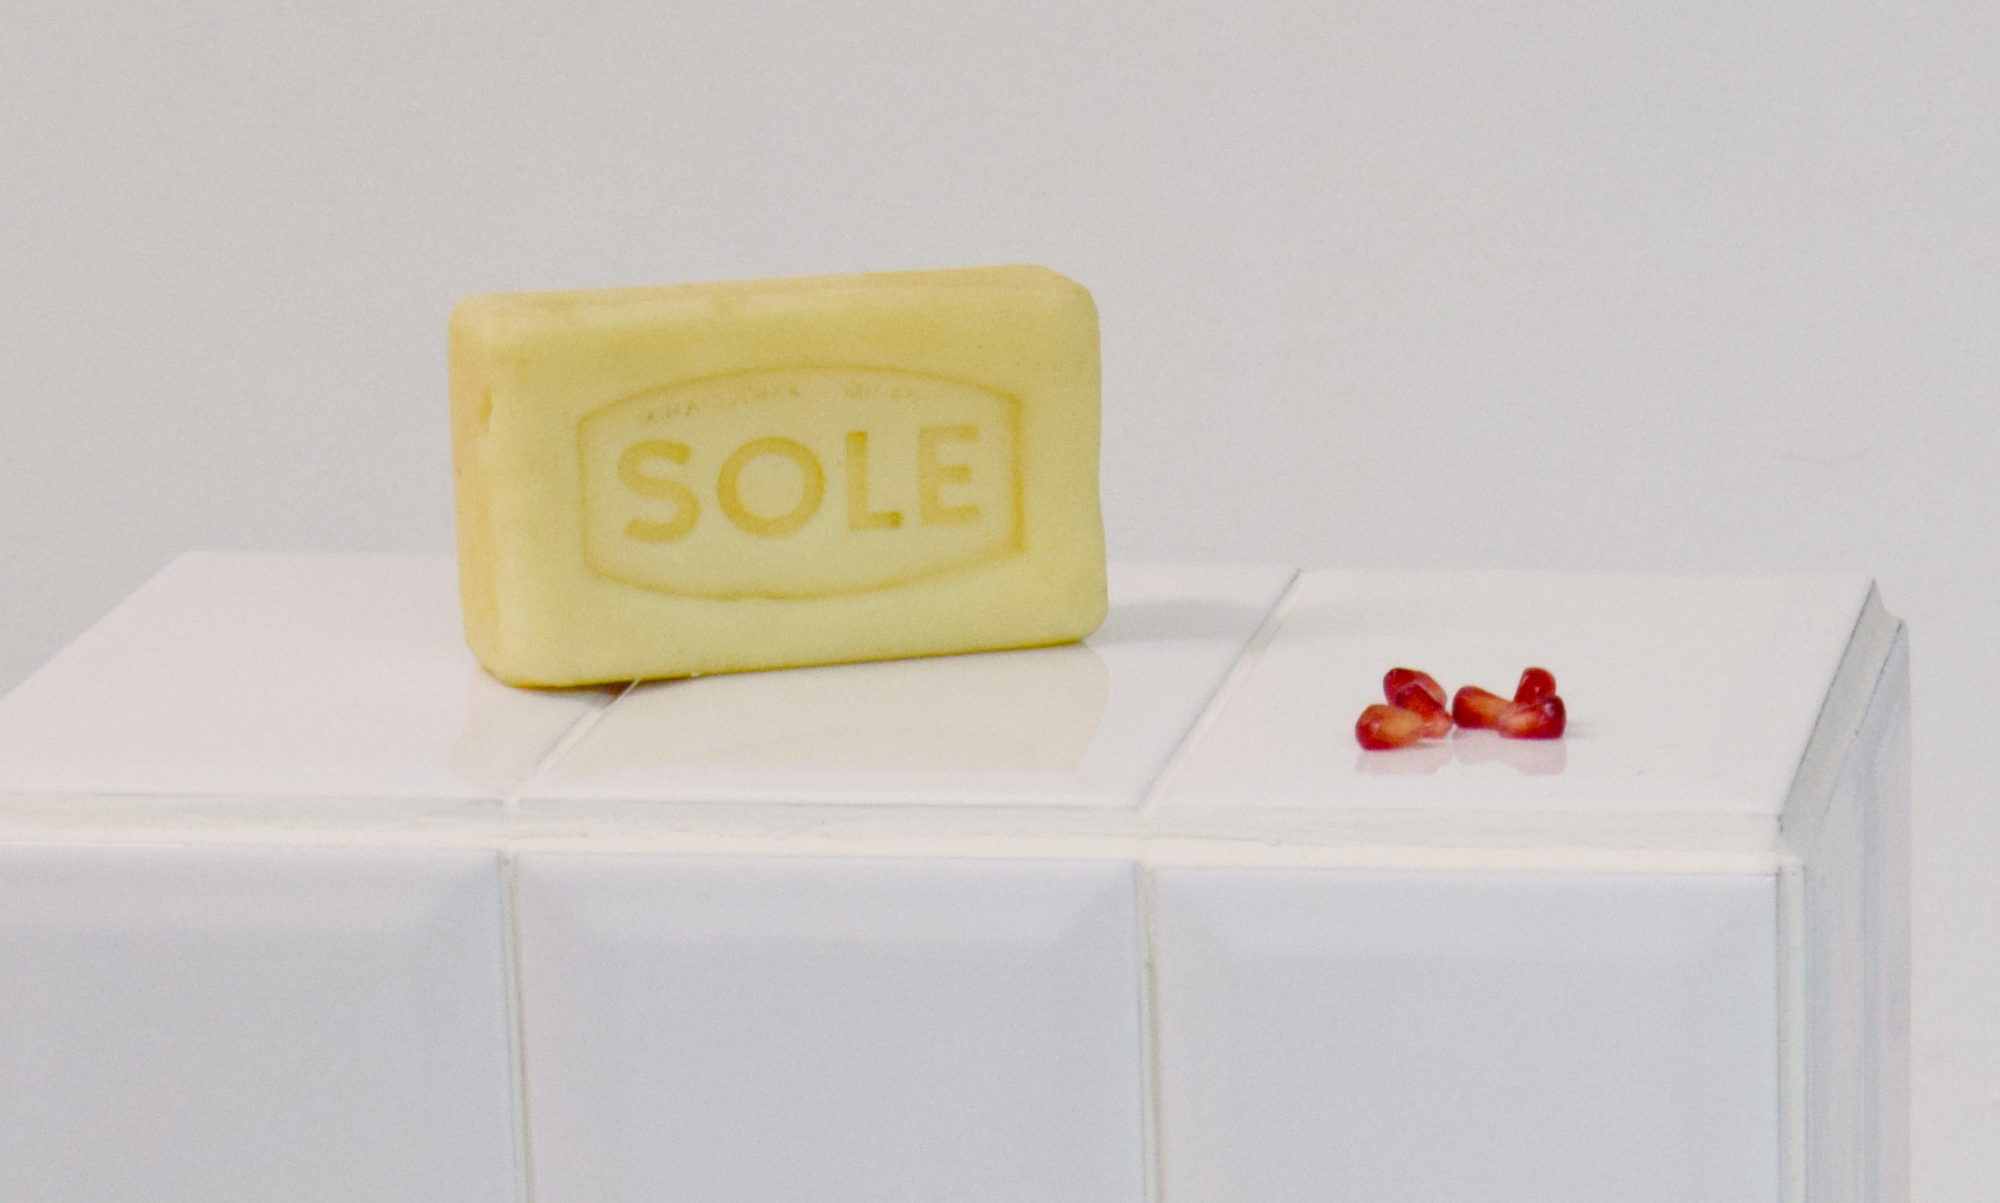 Glass soap and glass pomegranate on tiled plinth.